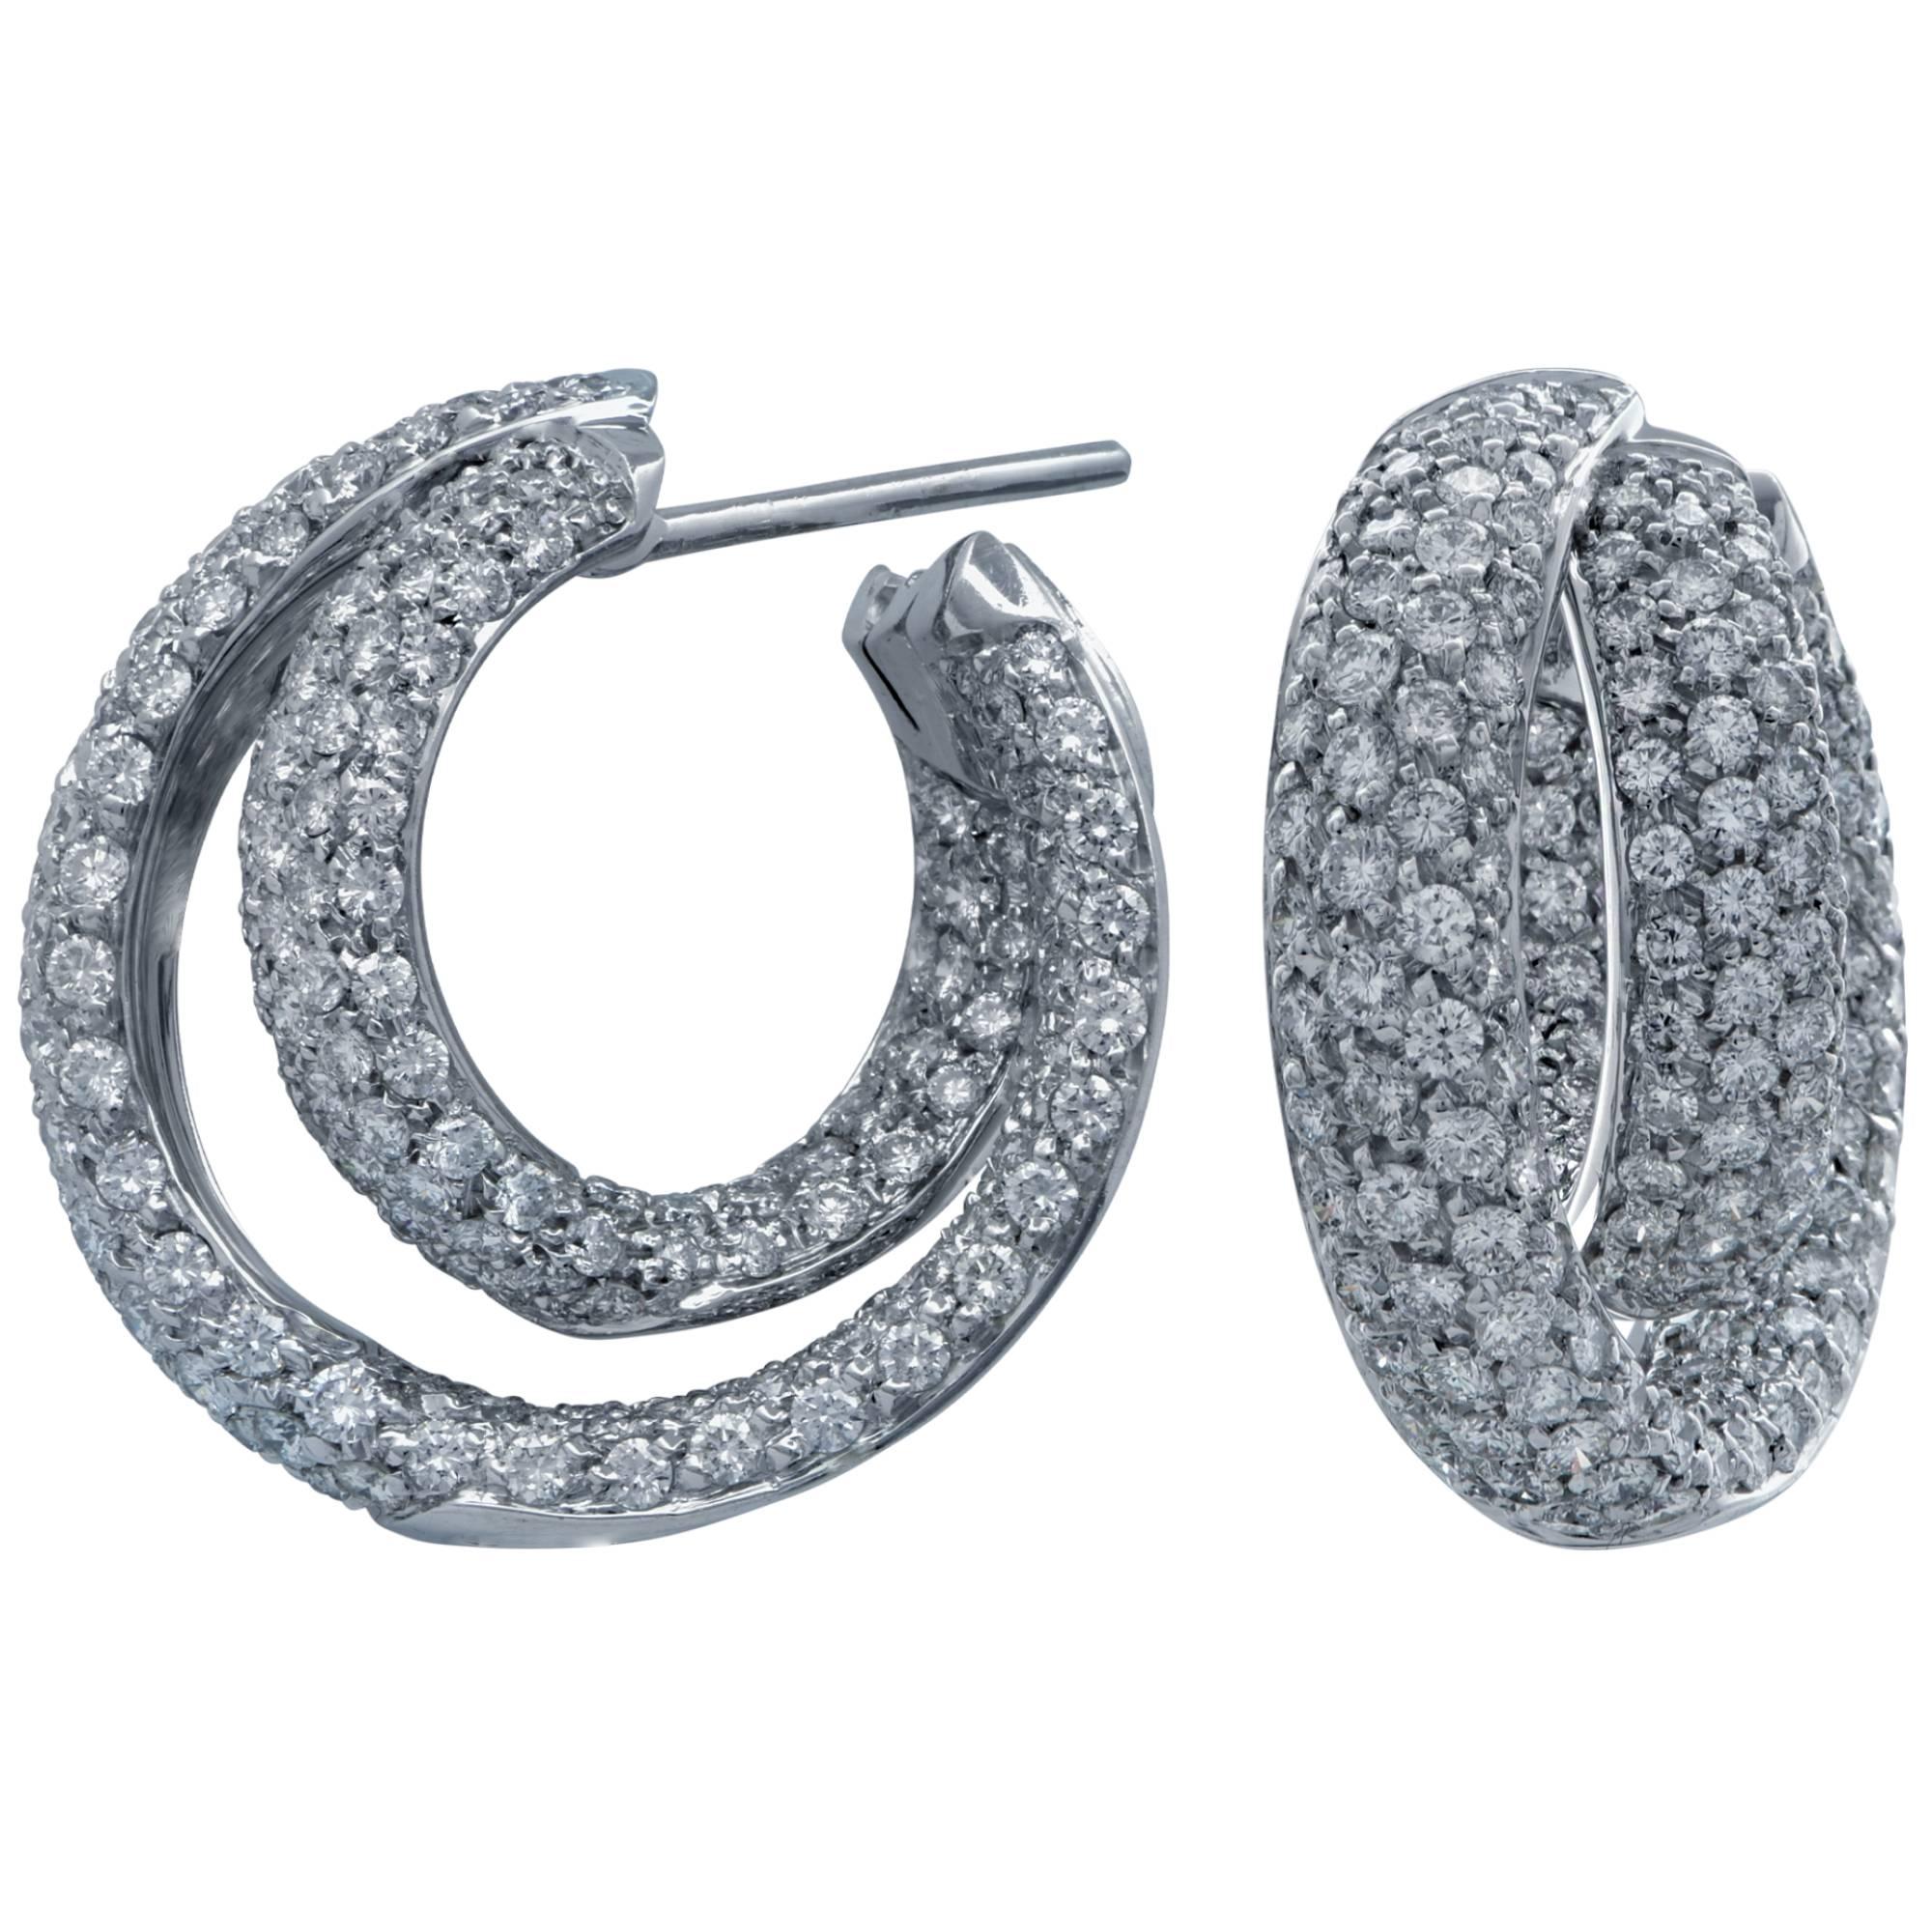 18k white gold hoop earrings featuring 380 round brilliant cut diamonds weighing approximately 7.50cts total G color VS clarity.

They are stamped and/or tested as 18k gold.
The metal weight is 17.88 grams.

These diamond earrings are accompanied by